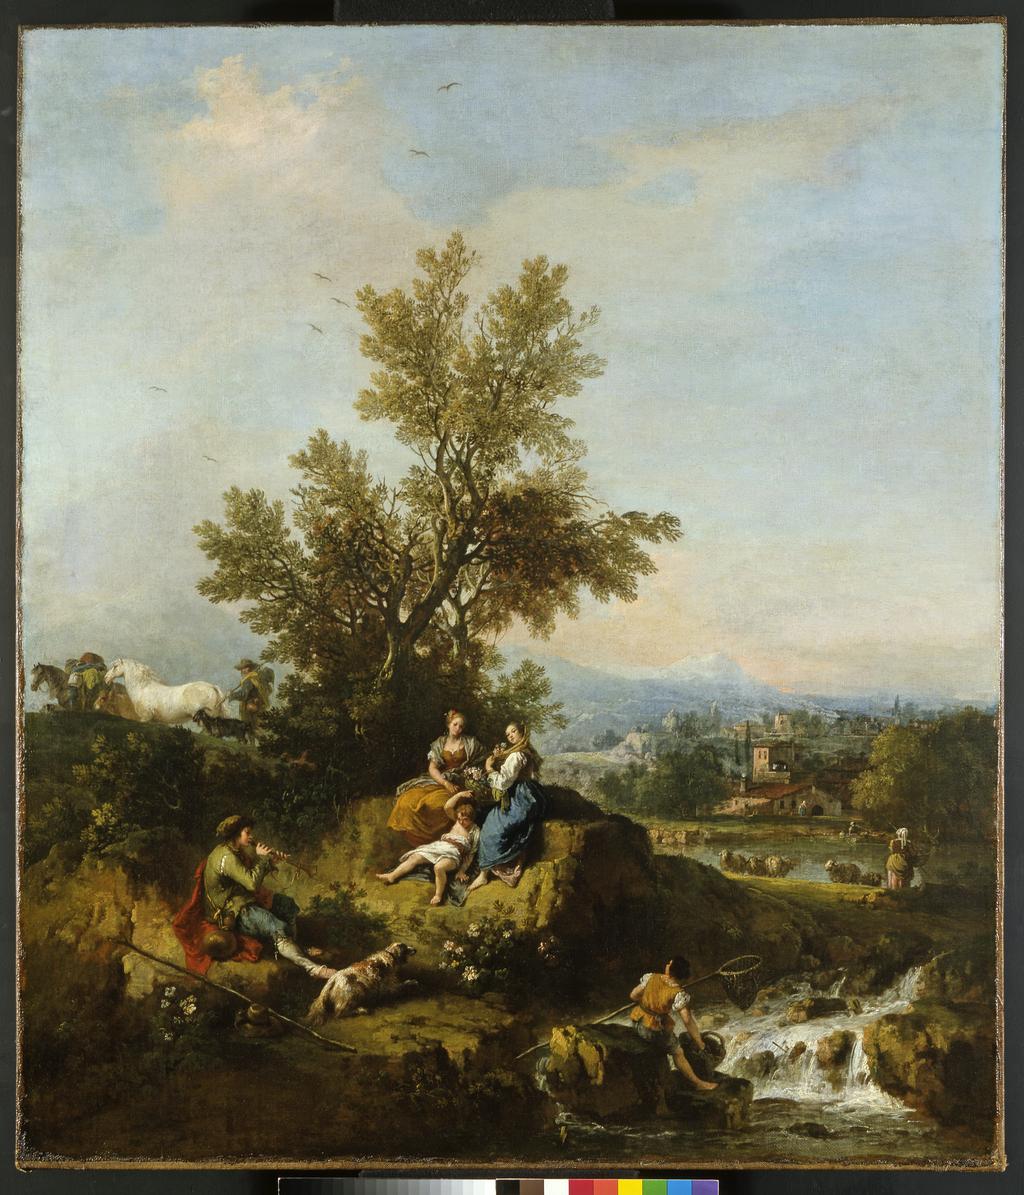 An image of Italianate wooded river landscape with a piping shepherd, two women and a child. Zuccarelli, Francesco (Italian, 1702-1788). Oil on canvas, height 105.5 cm, width 89.5 cm.